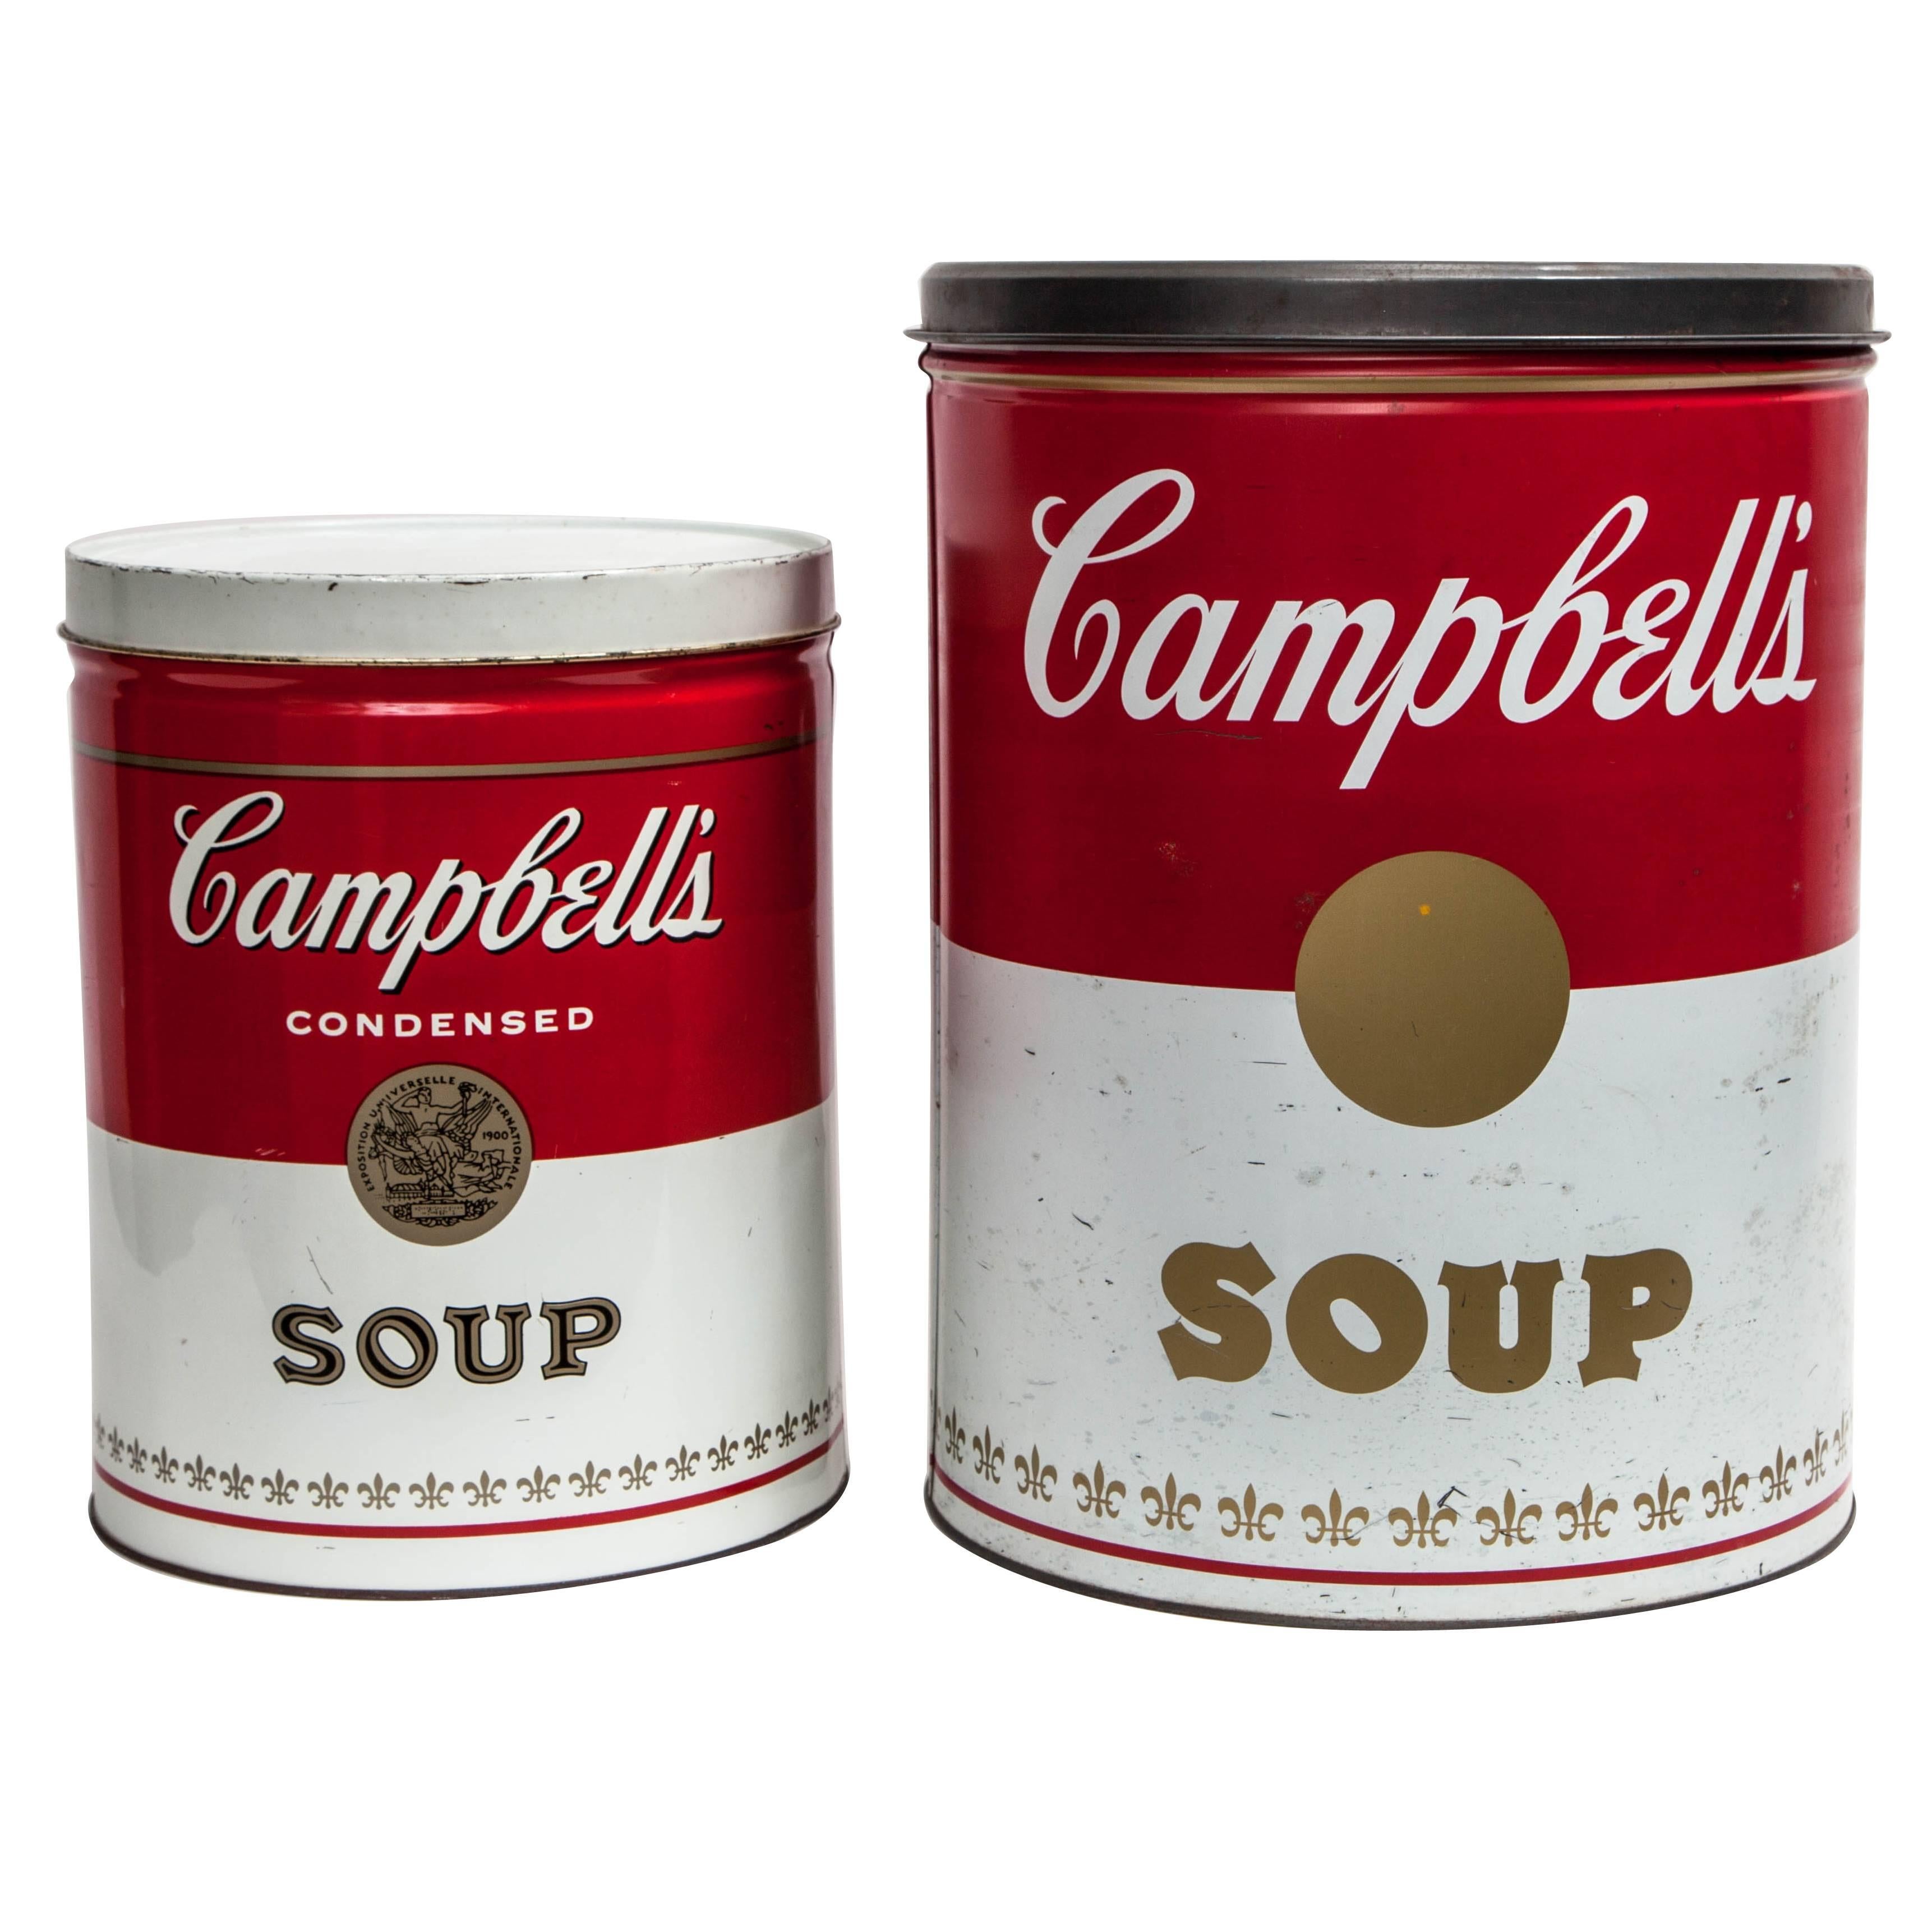 Andy Warhol 'after' Pop Art Campbell's Soup Cans, USA, 1960s